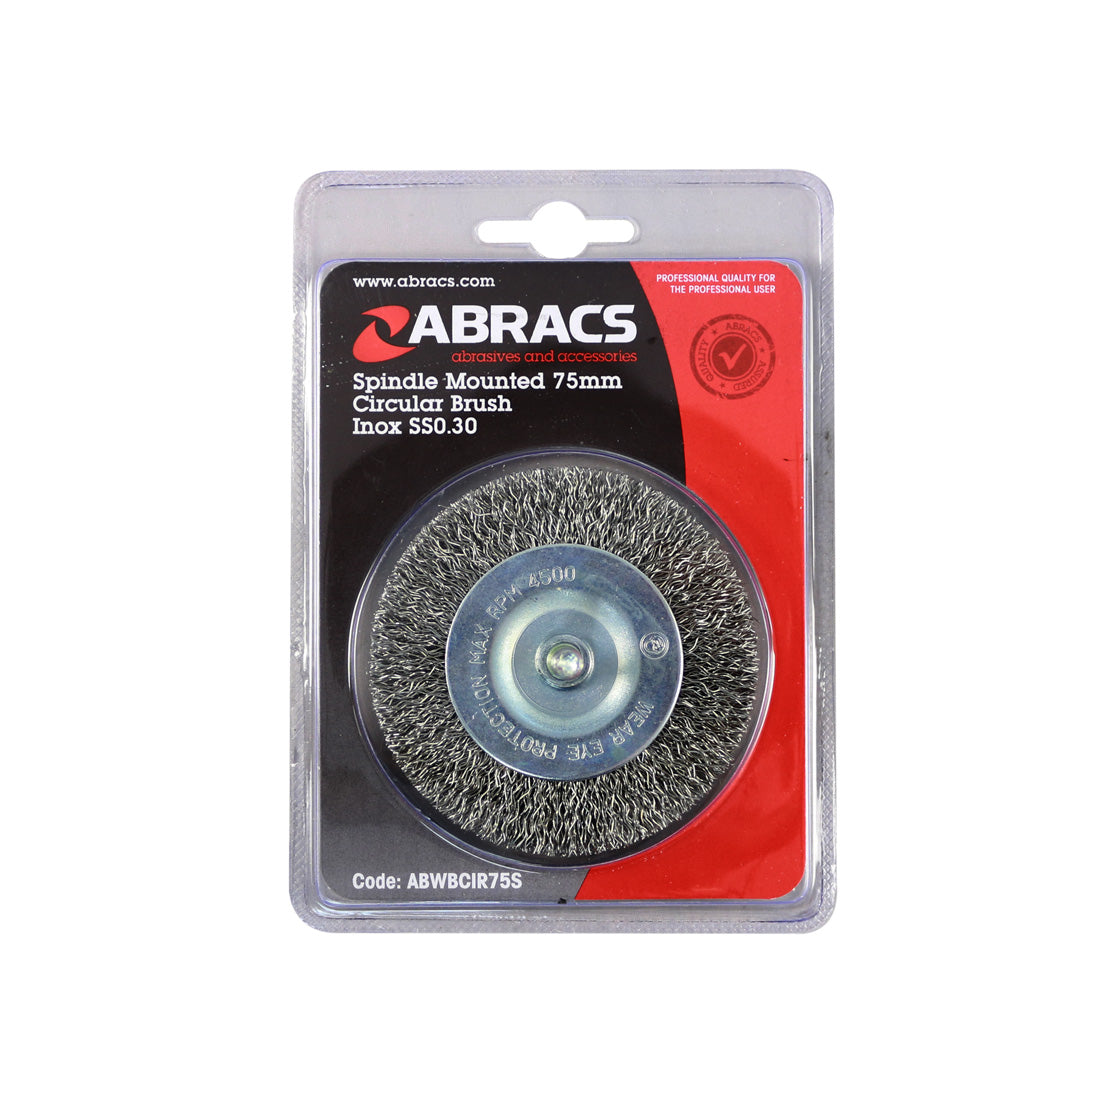 Abracs Spindle Mounted Circular Wire Brush Stainless Steel - 75mm